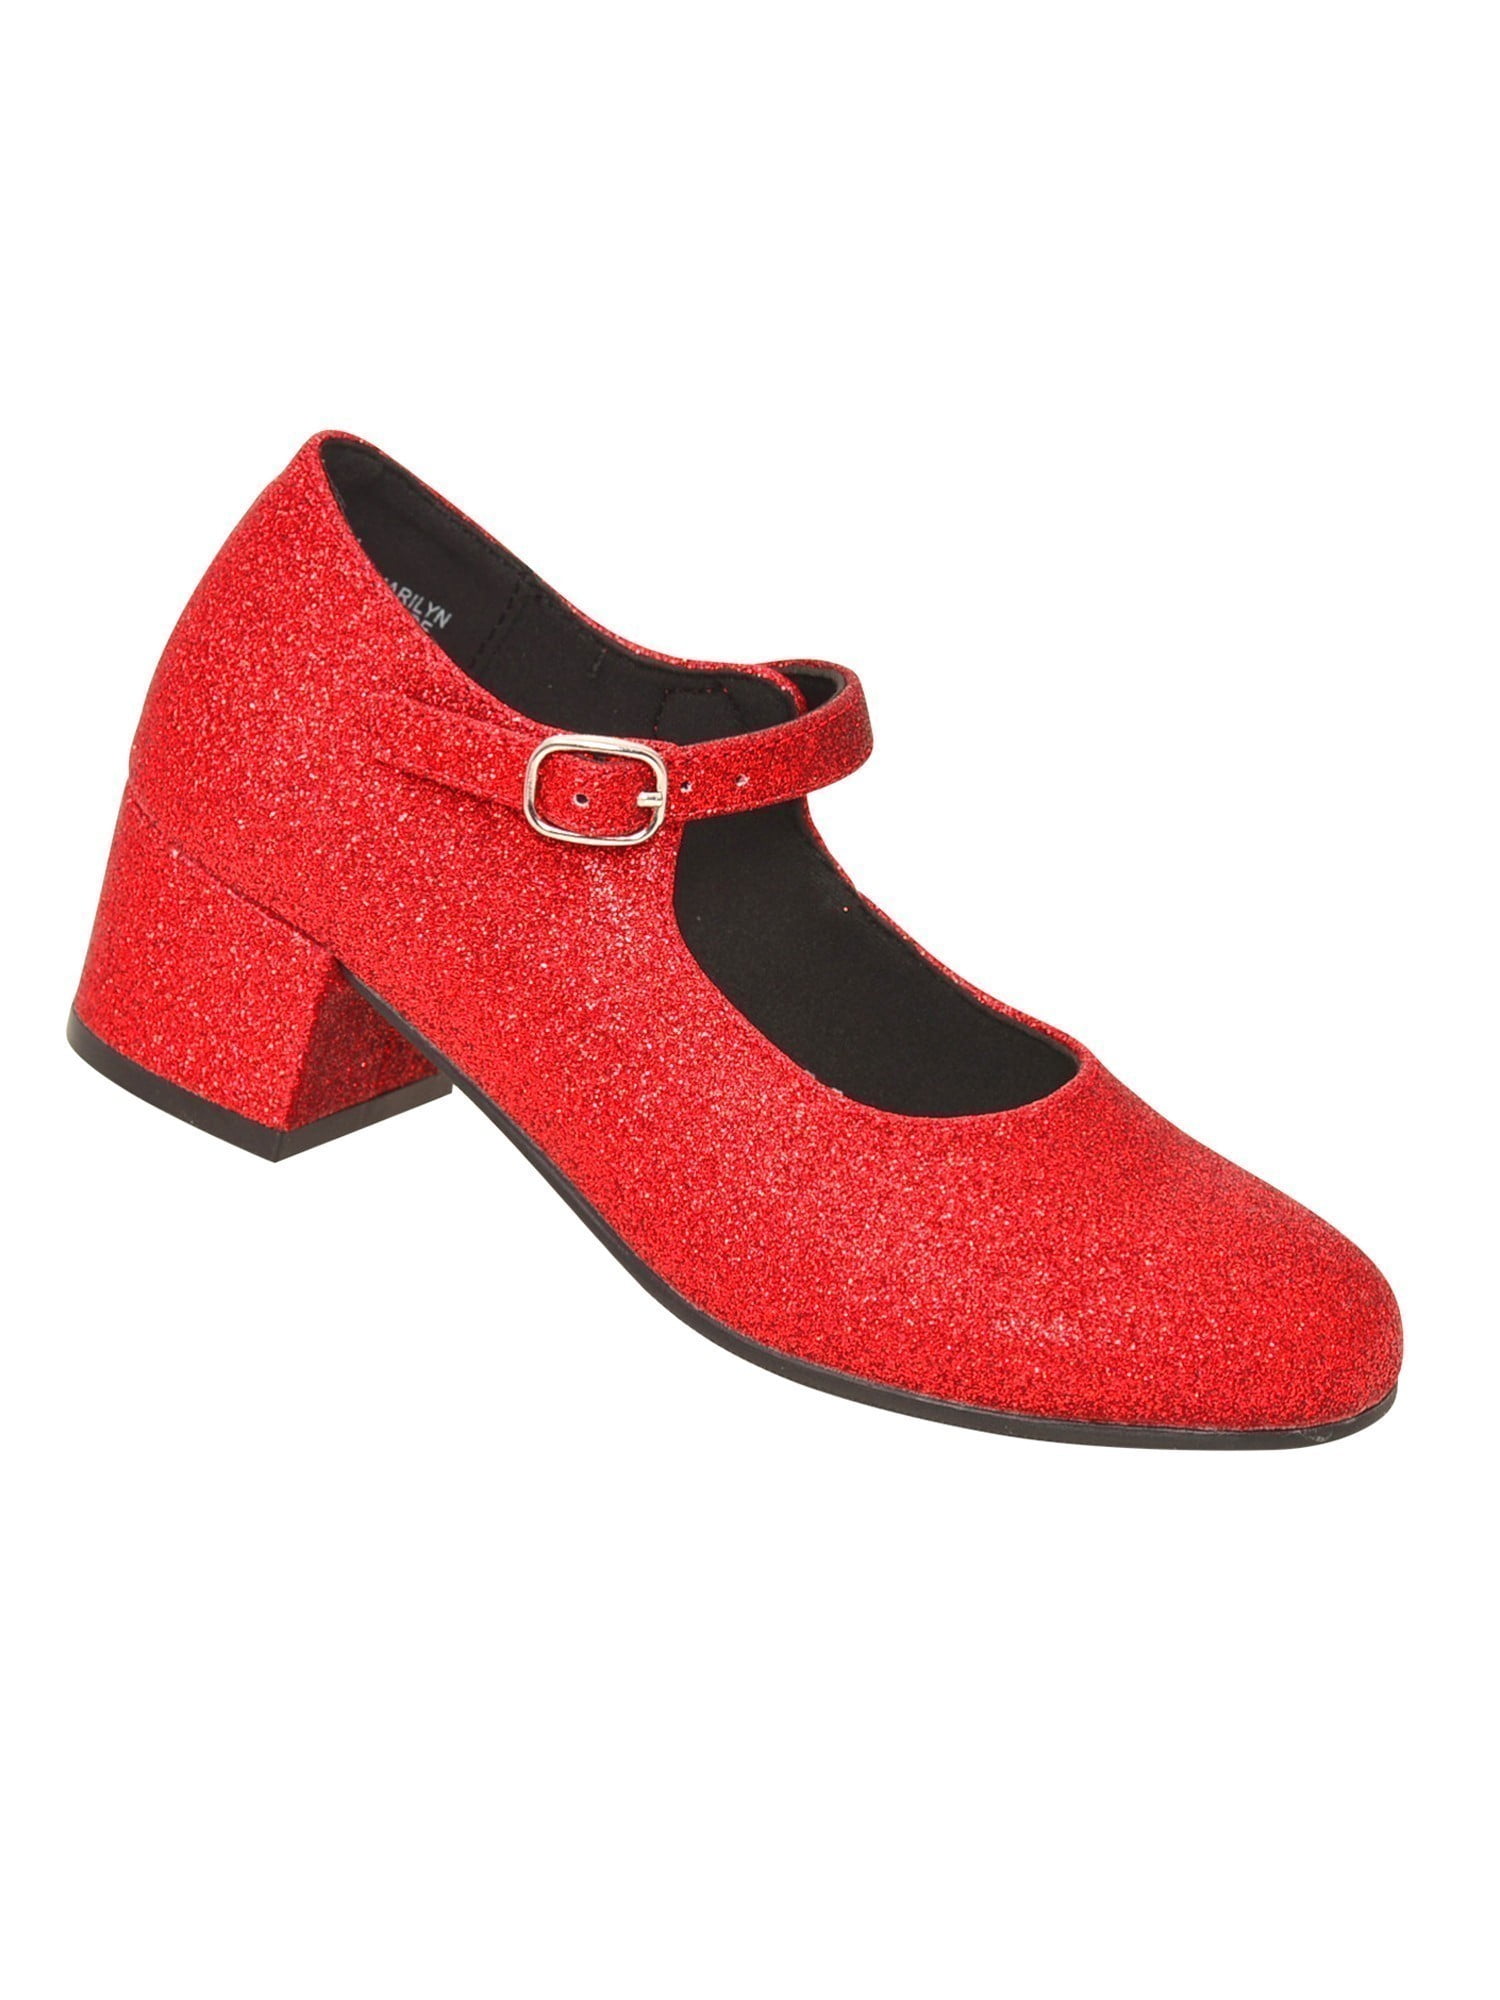 Baby Girls red shoes gorgeous 3 styles 